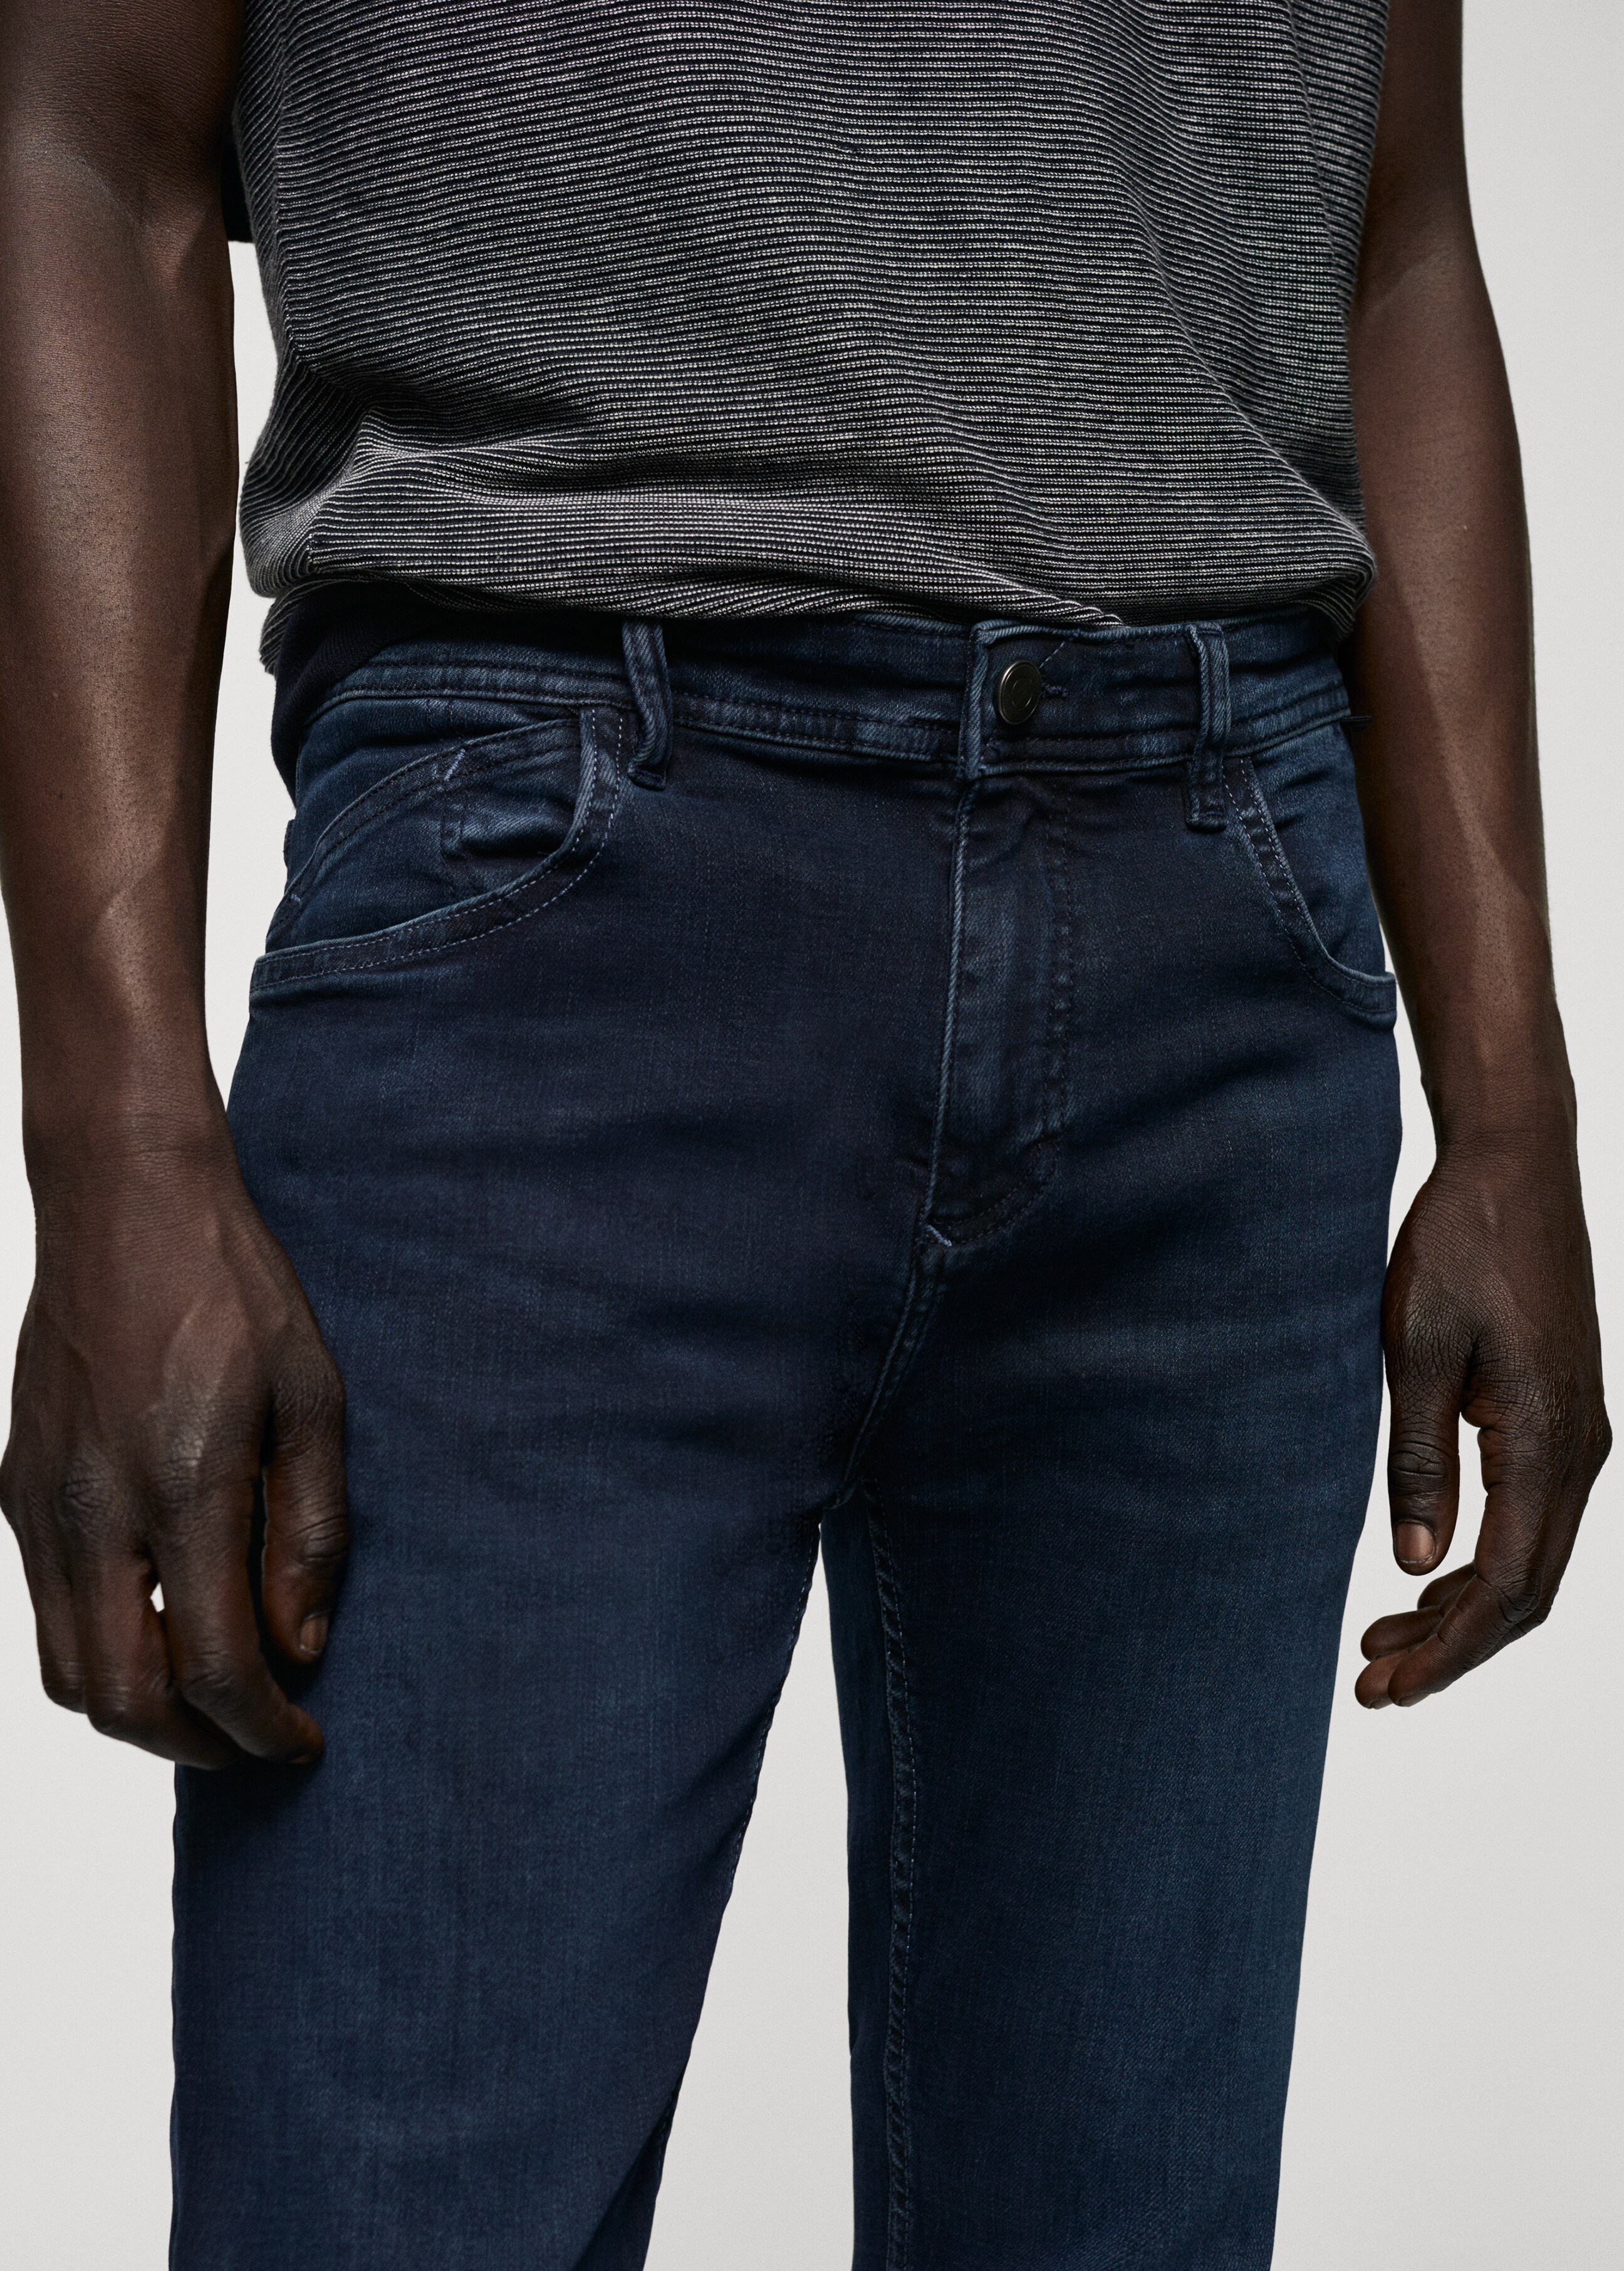 Premium skinny jeans - Details of the article 1